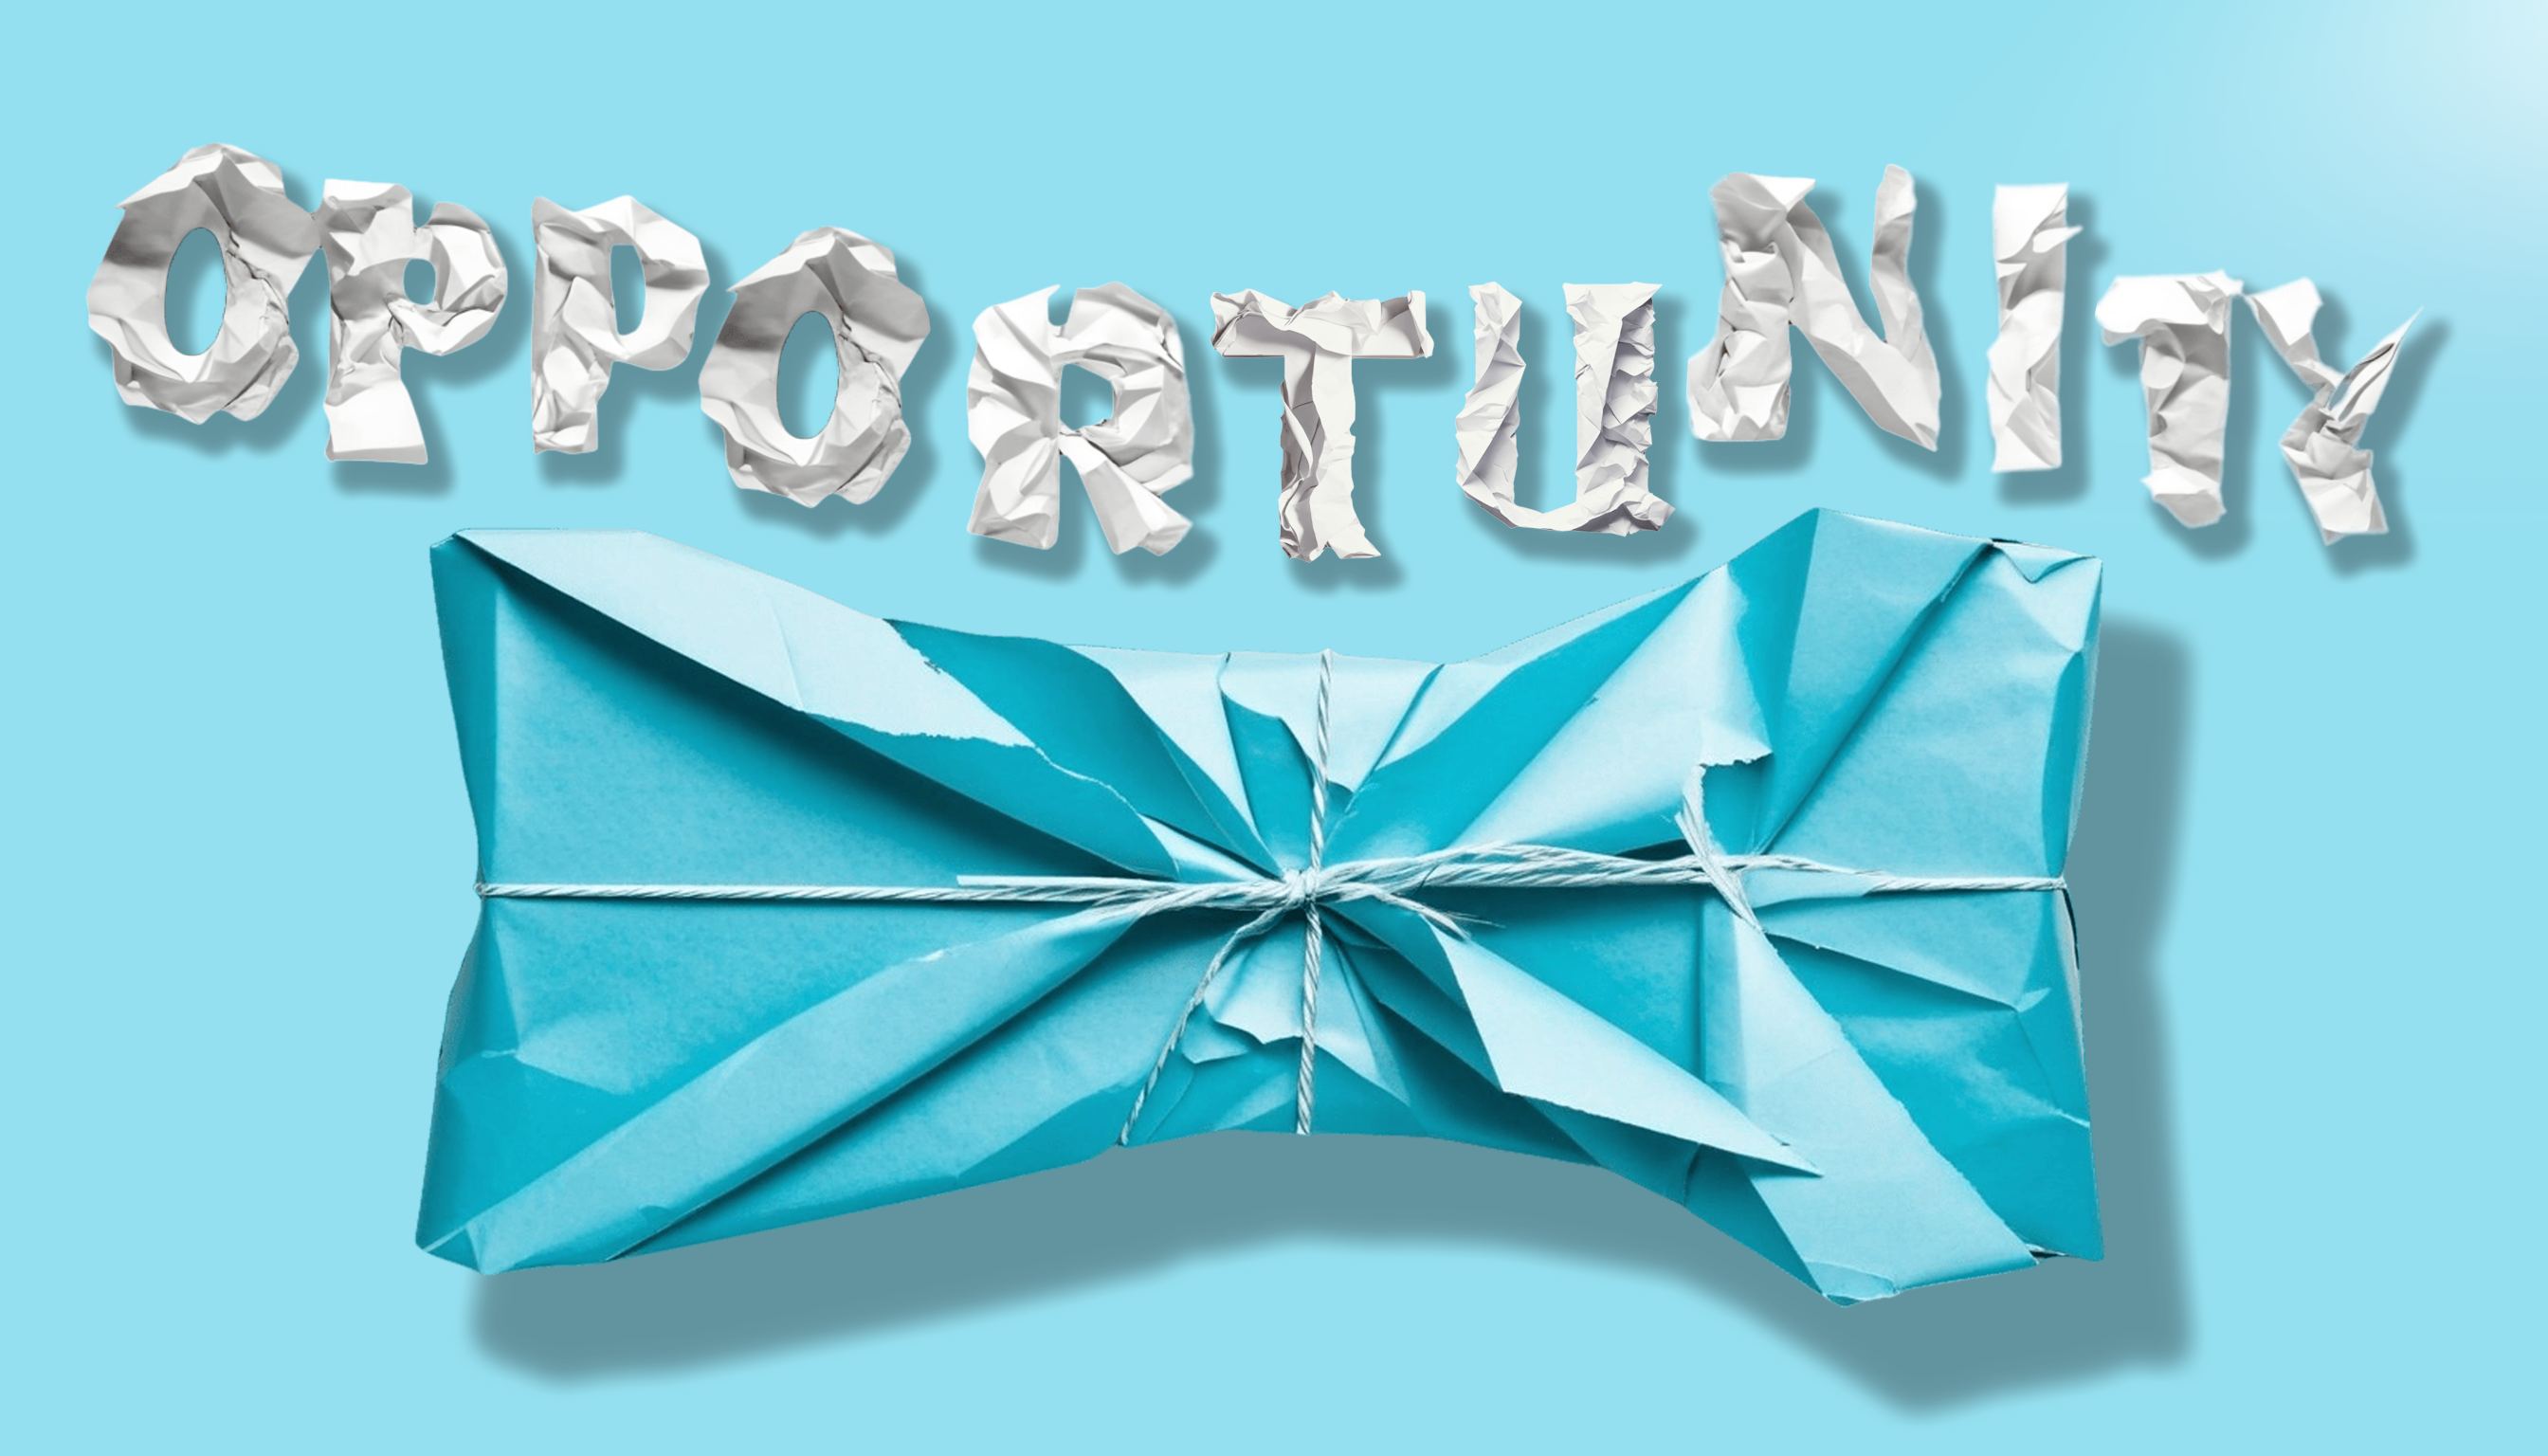 The word opportunity made out of screwed up white paper above a blue present wrapped badly in ripped paper